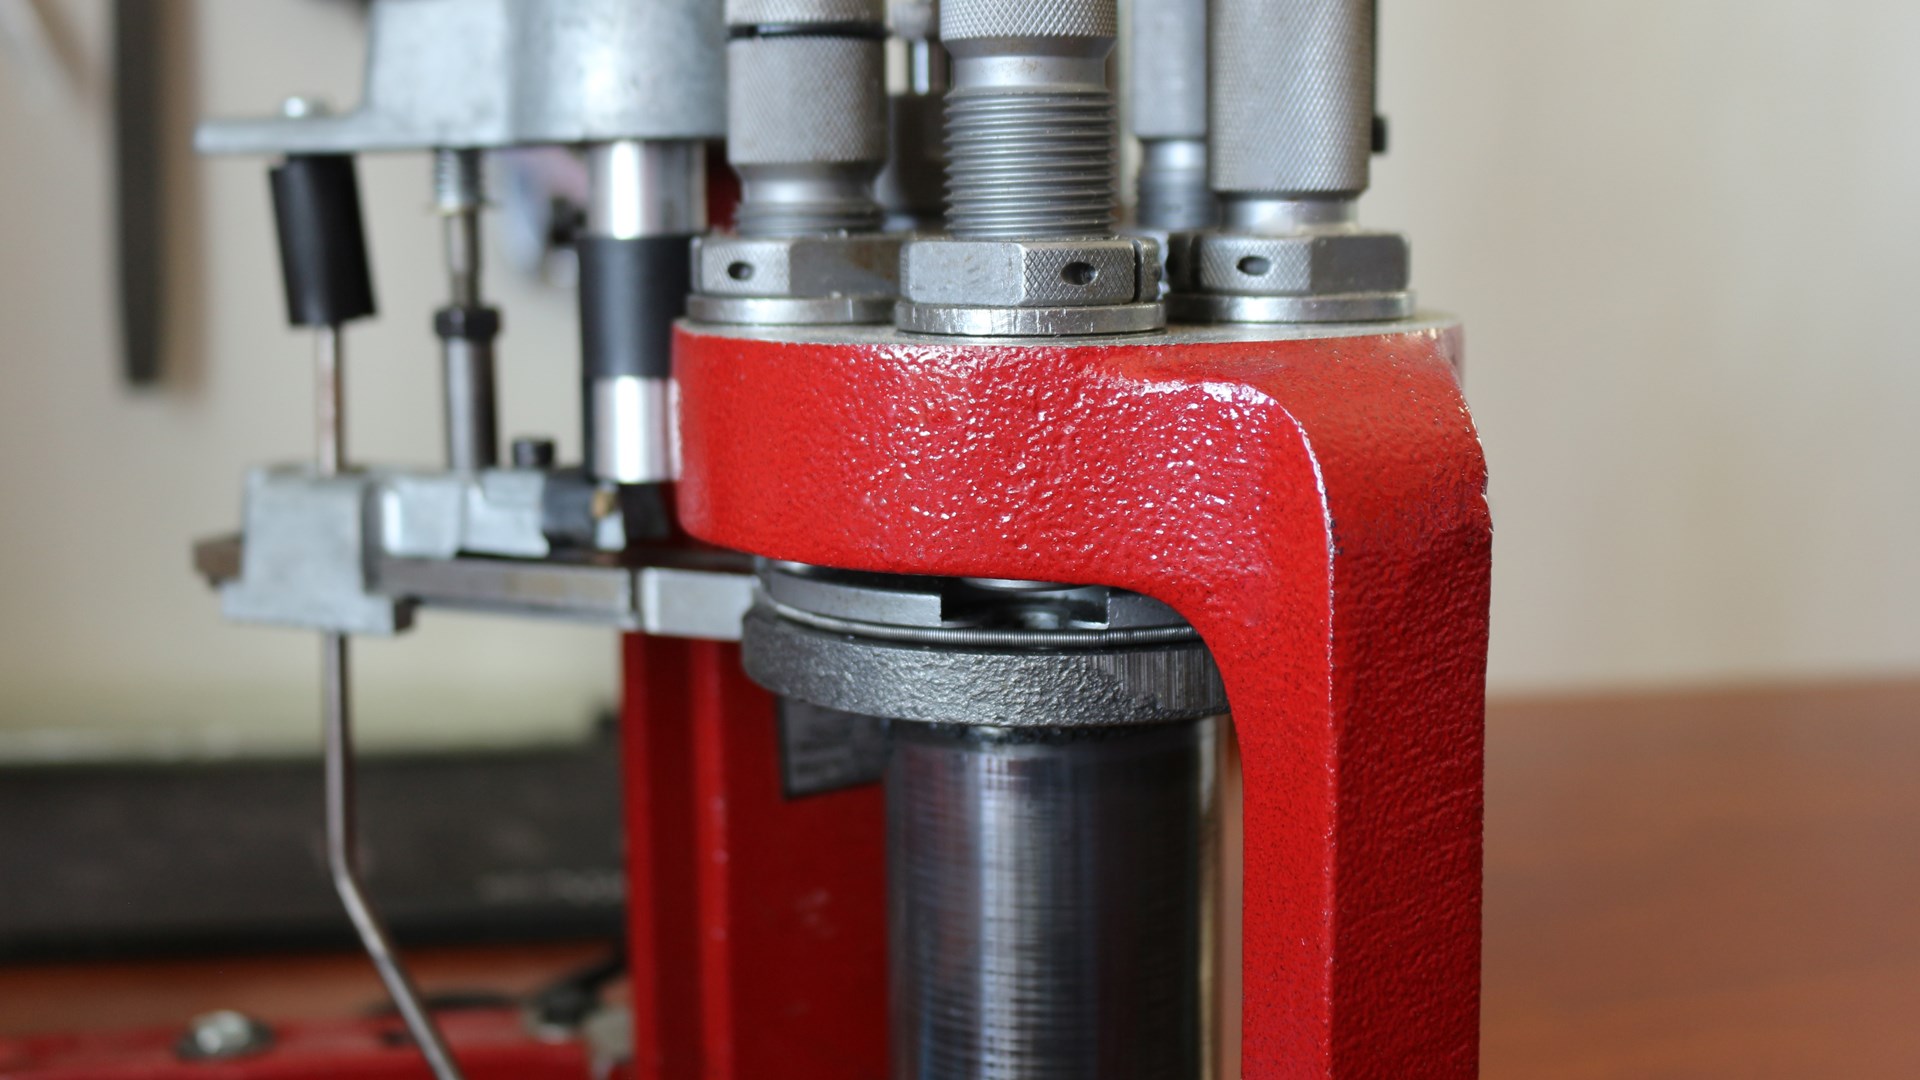 Hornady progressive reloading press shown with in upstroke position to clear jams